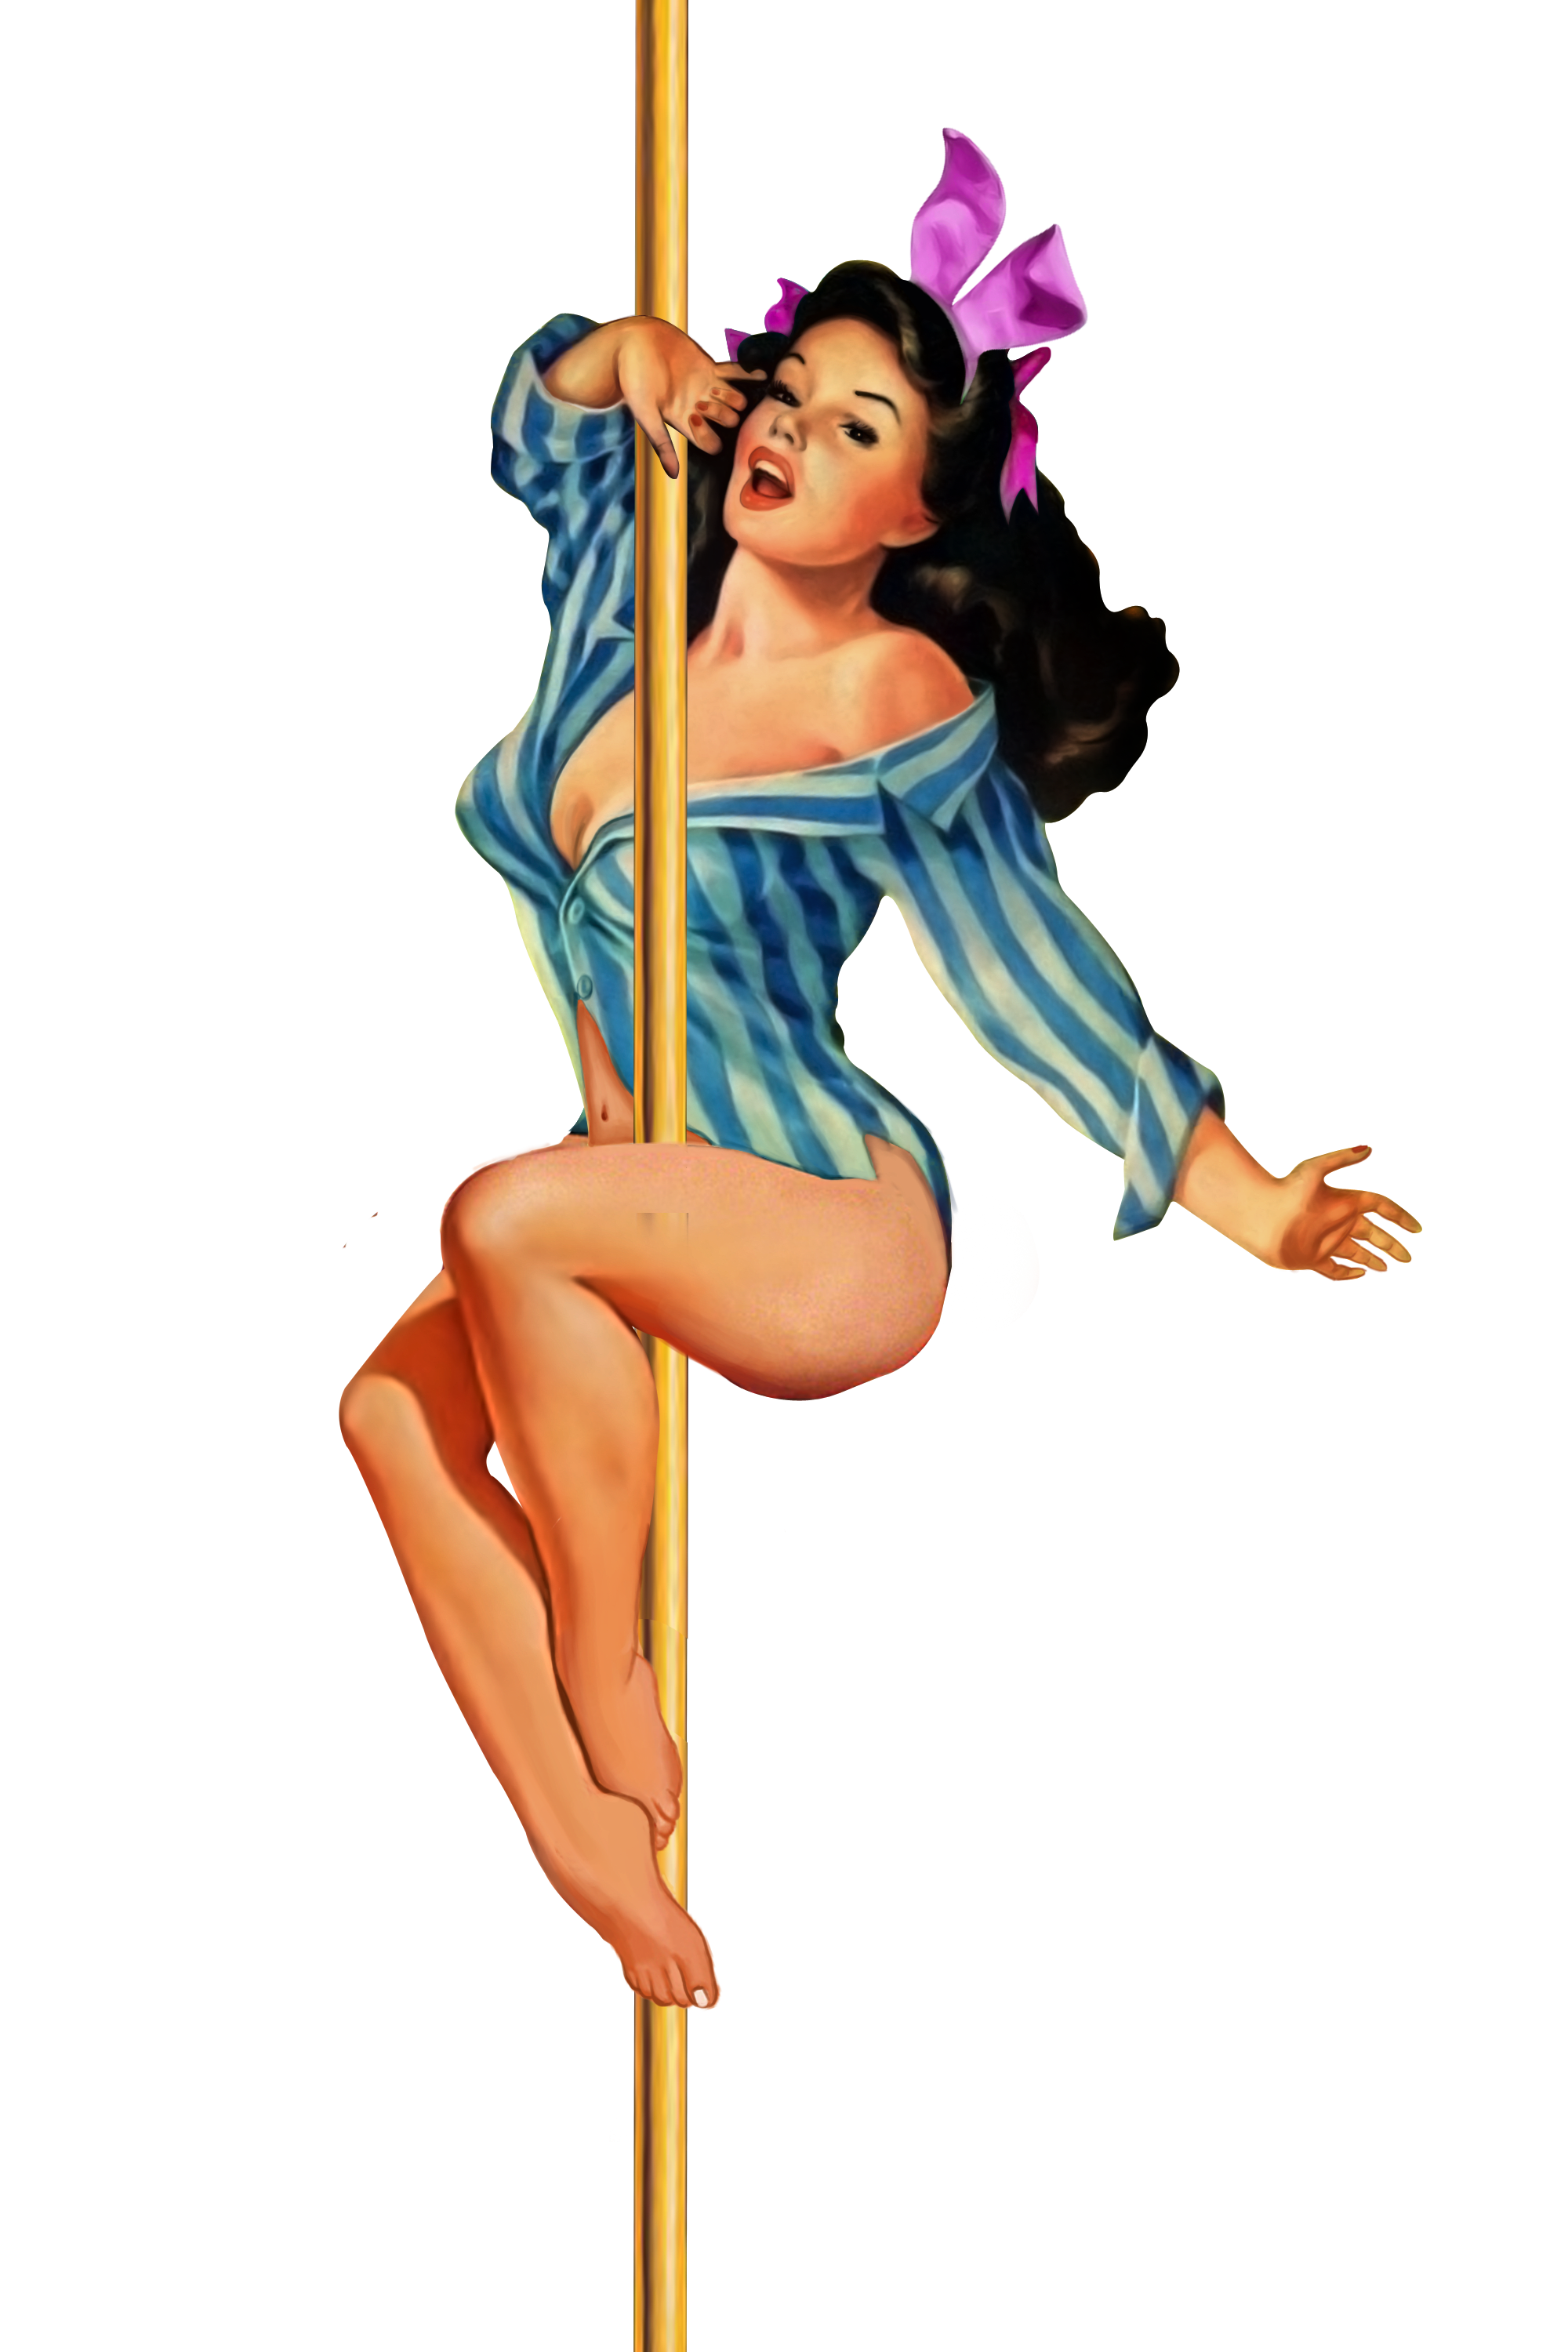 design-you-into-an-attractive-pin-up-girl-in-my-style